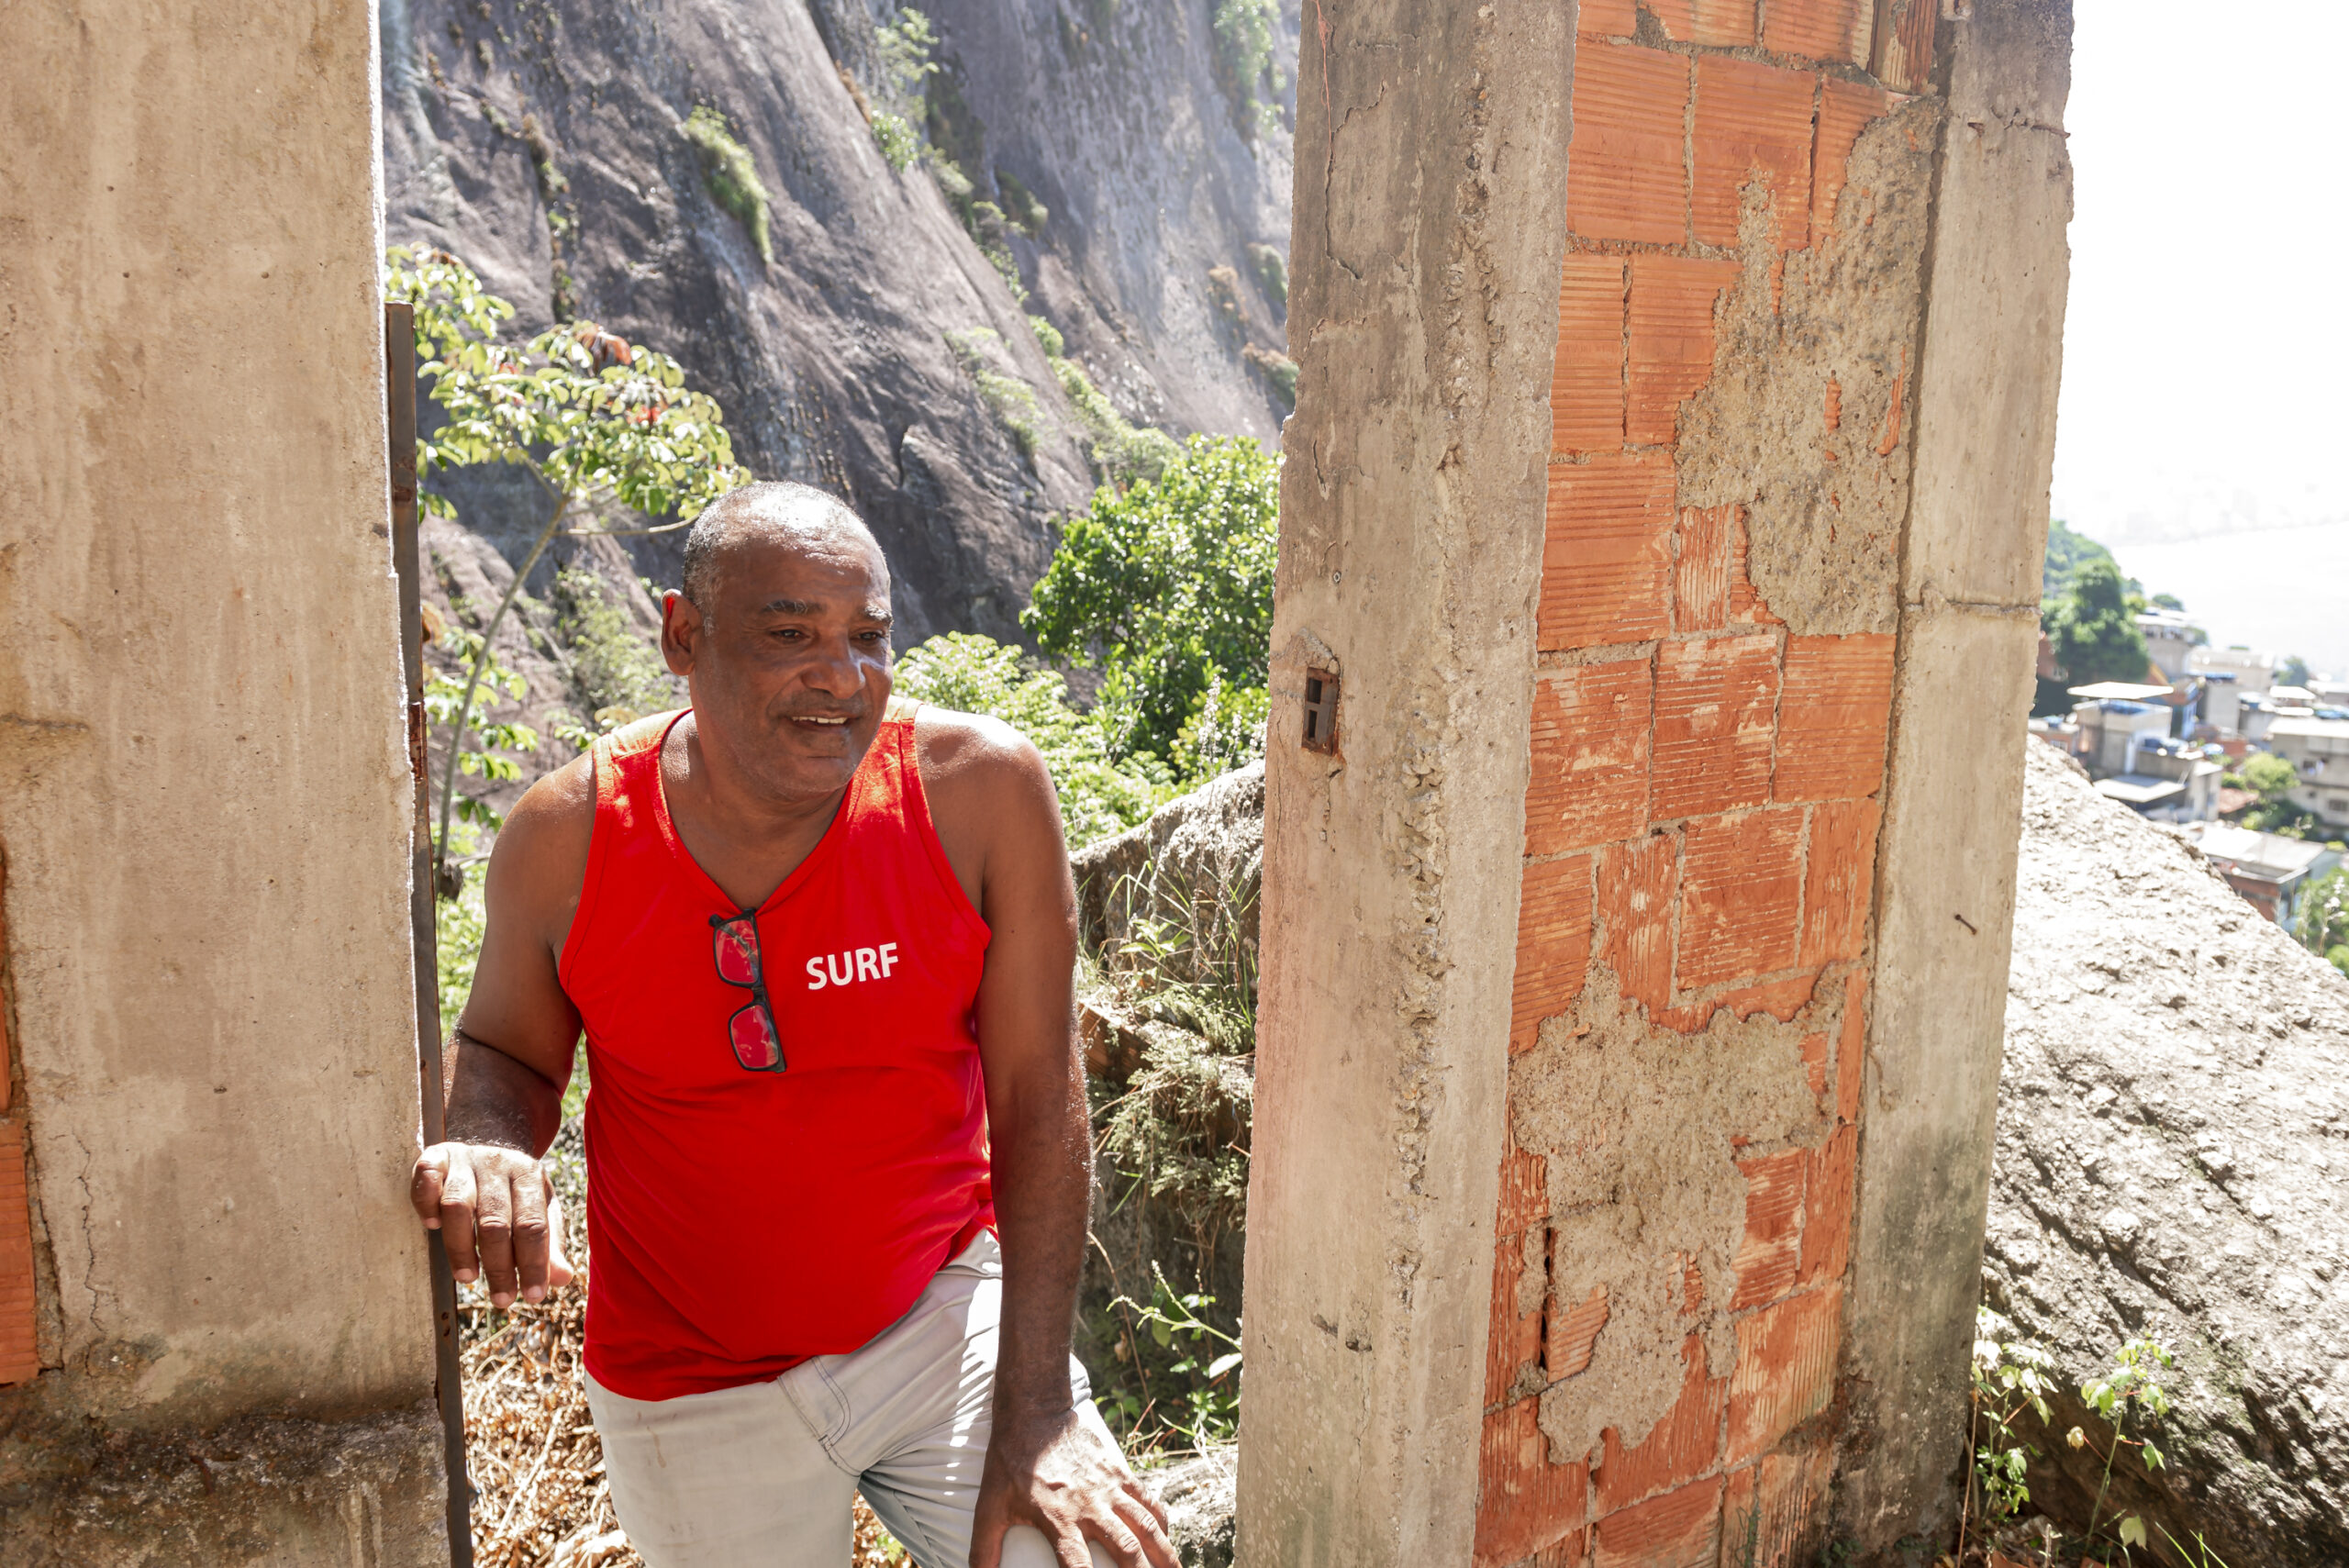 Antônio Paiva observes what is left of his house in Jaqueira, Vidigal, demolished without notice by the City Hall in 2019. Photo: Igor Albuquerque 